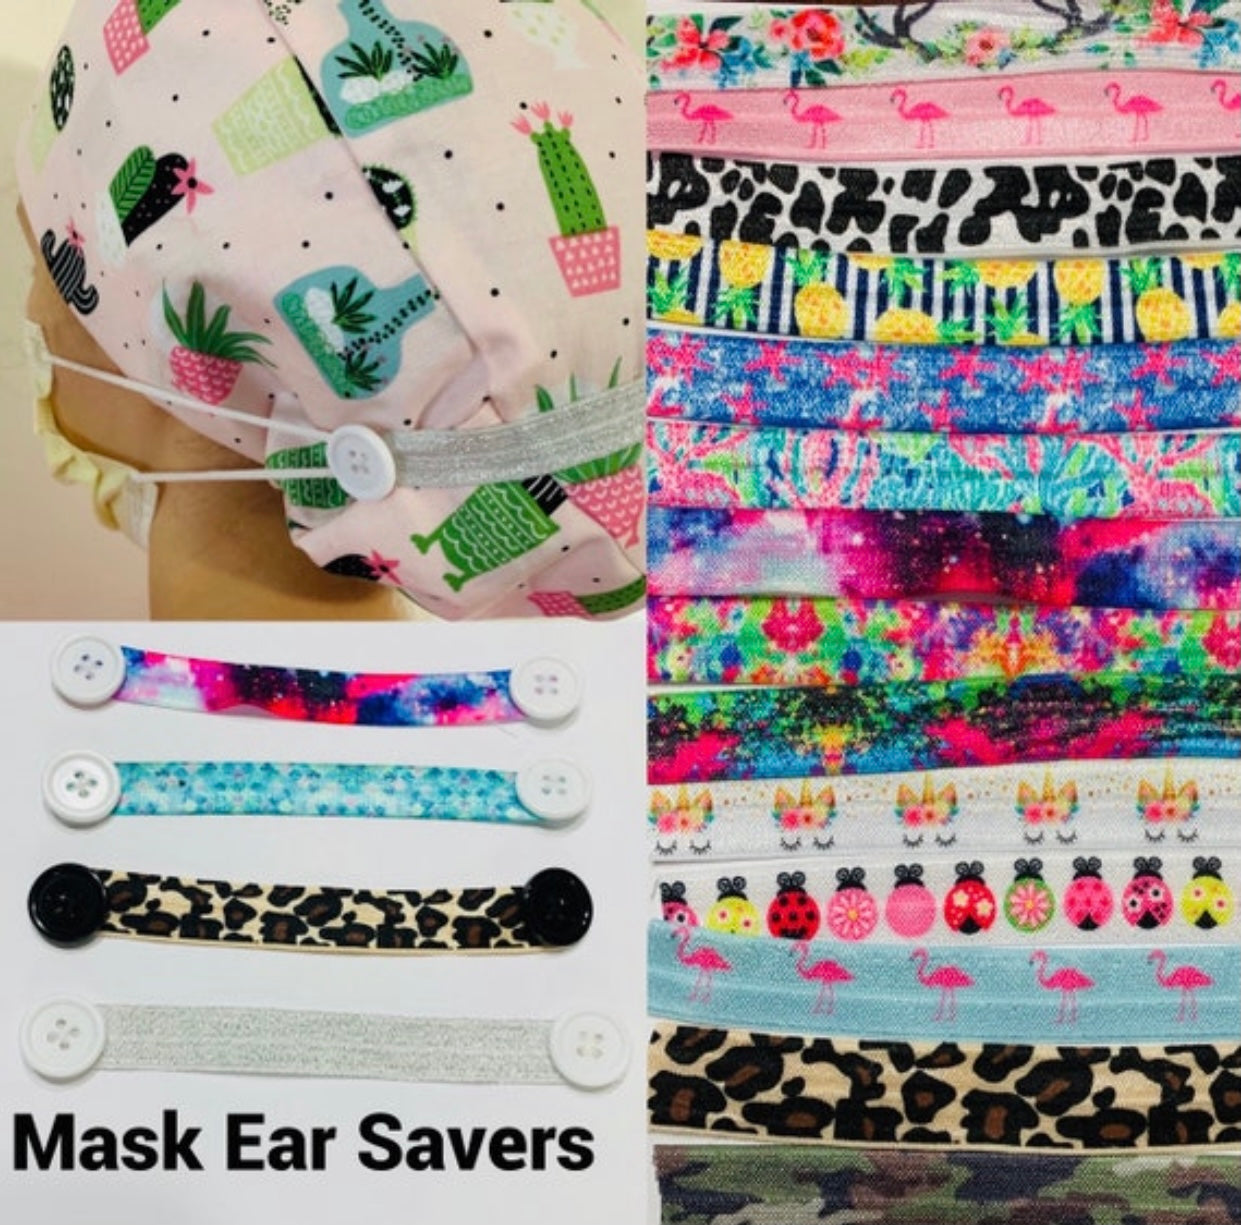 Ear savers for Mask